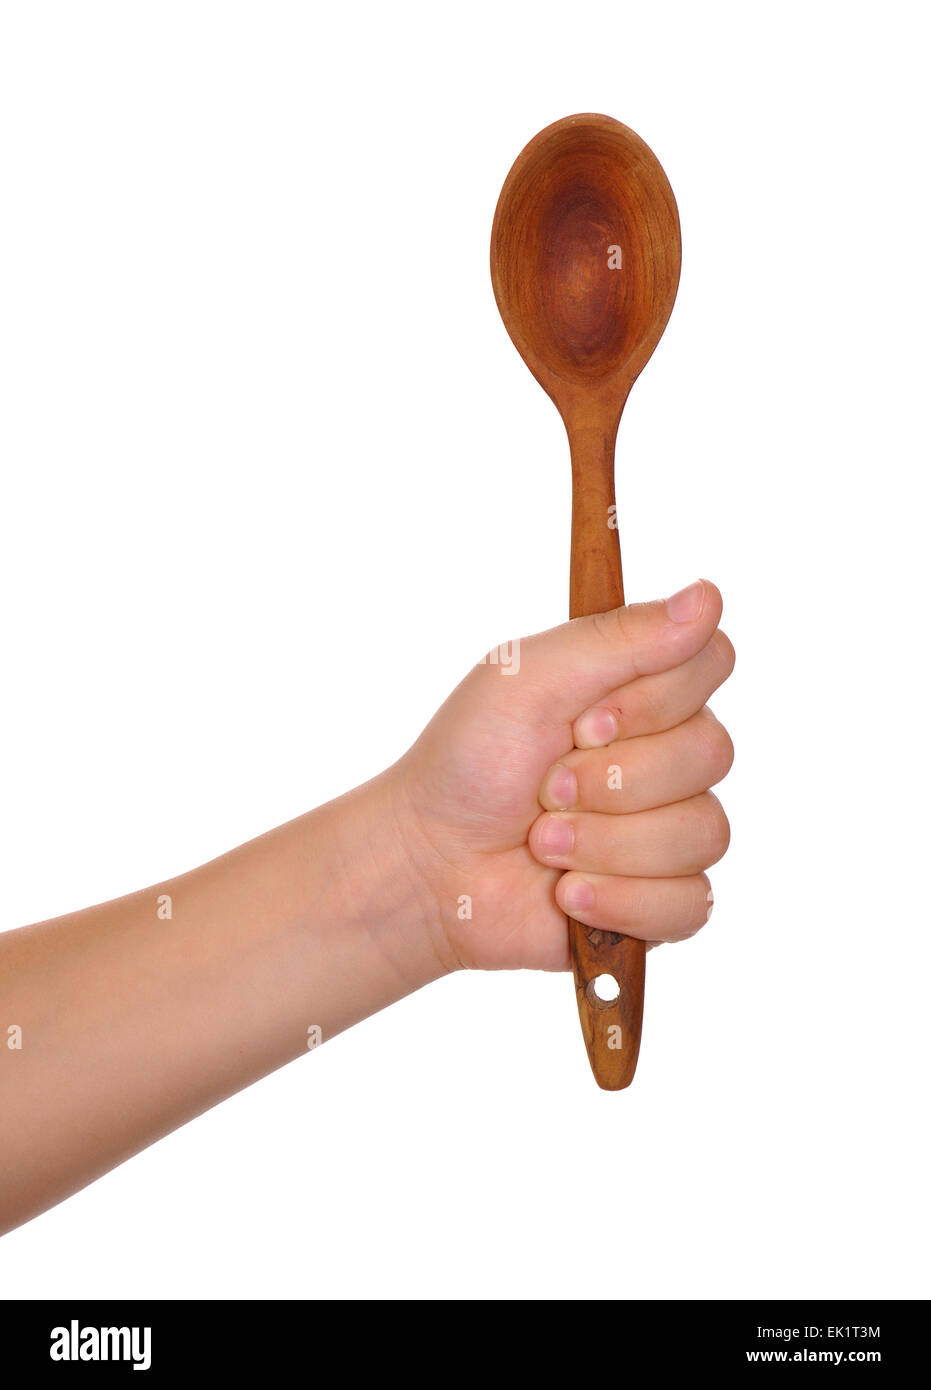 Wooden spoon in baby hand over white background Stock Photo